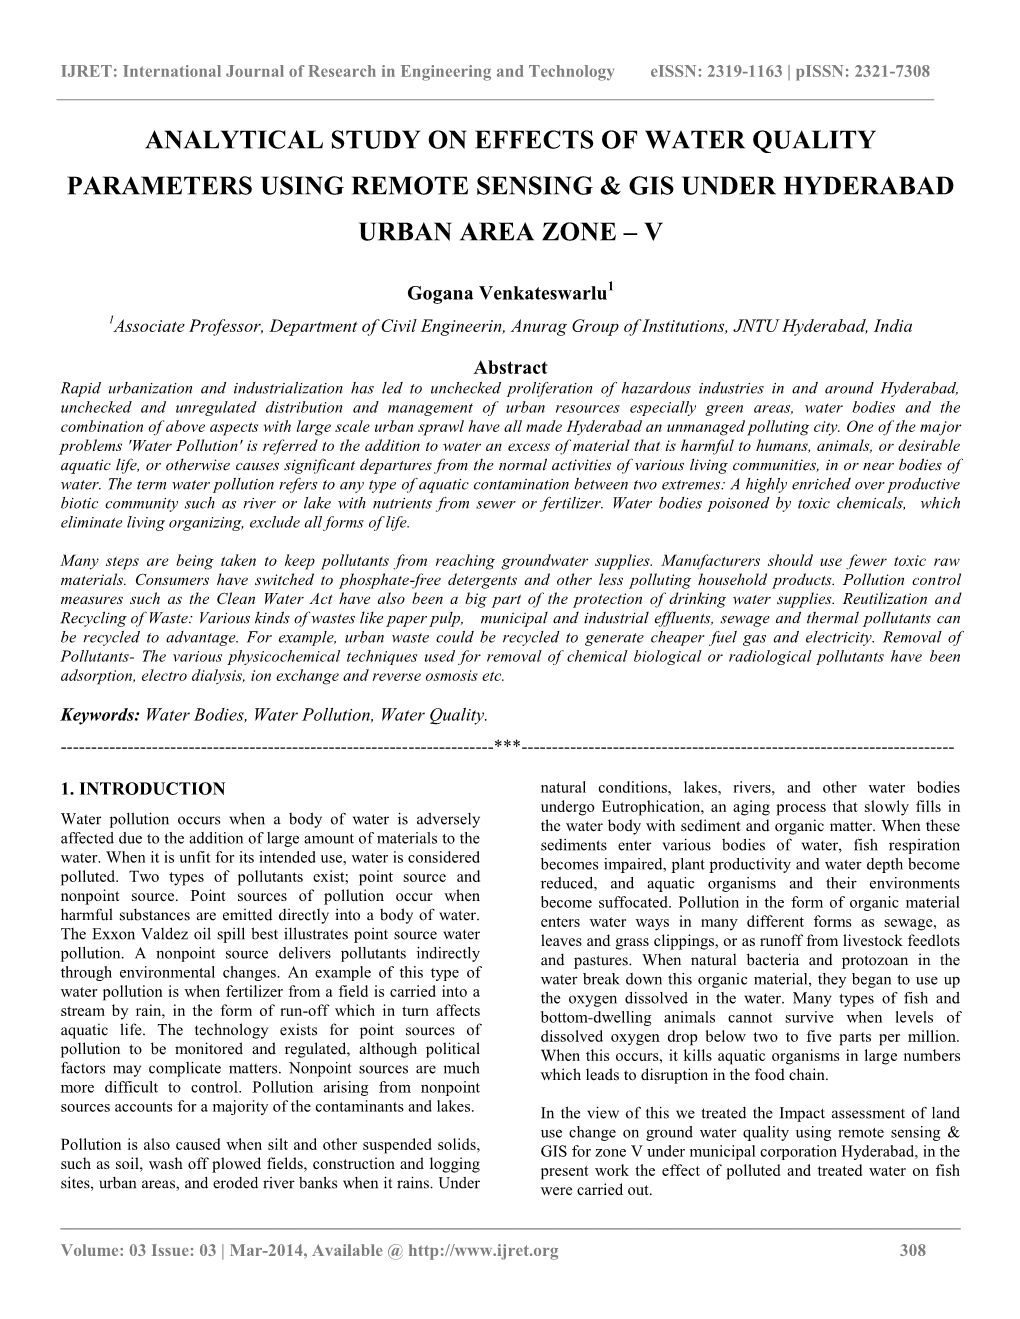 Analytical Study on Effects of Water Quality Parameters Using Remote Sensing & Gis Under Hyderabad Urban Area Zone – V